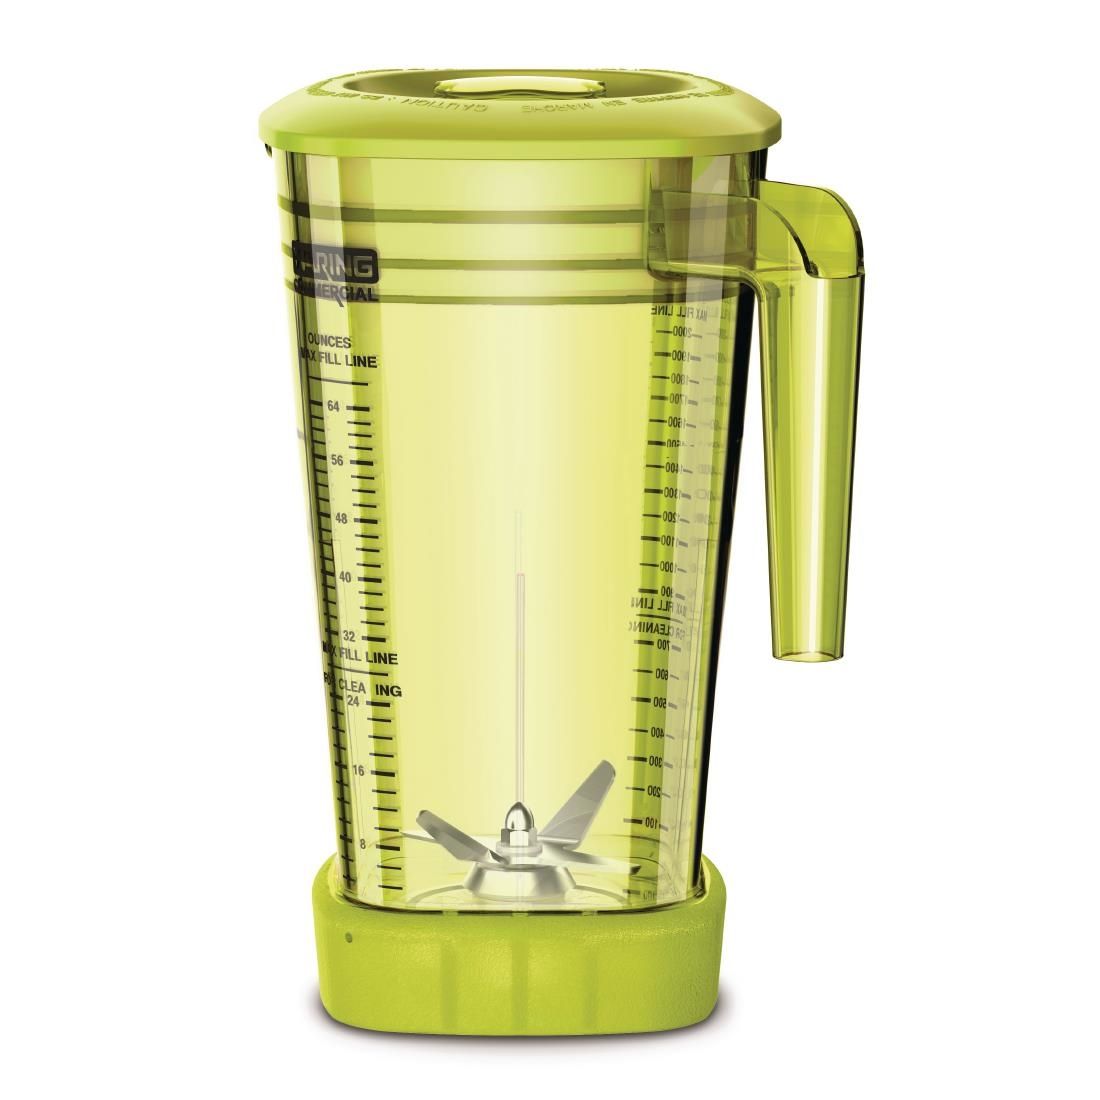 DW984 Waring Yellow 2Ltr Jar for use with Waring Xtreme Hi-Power Blender JD Catering Equipment Solutions Ltd